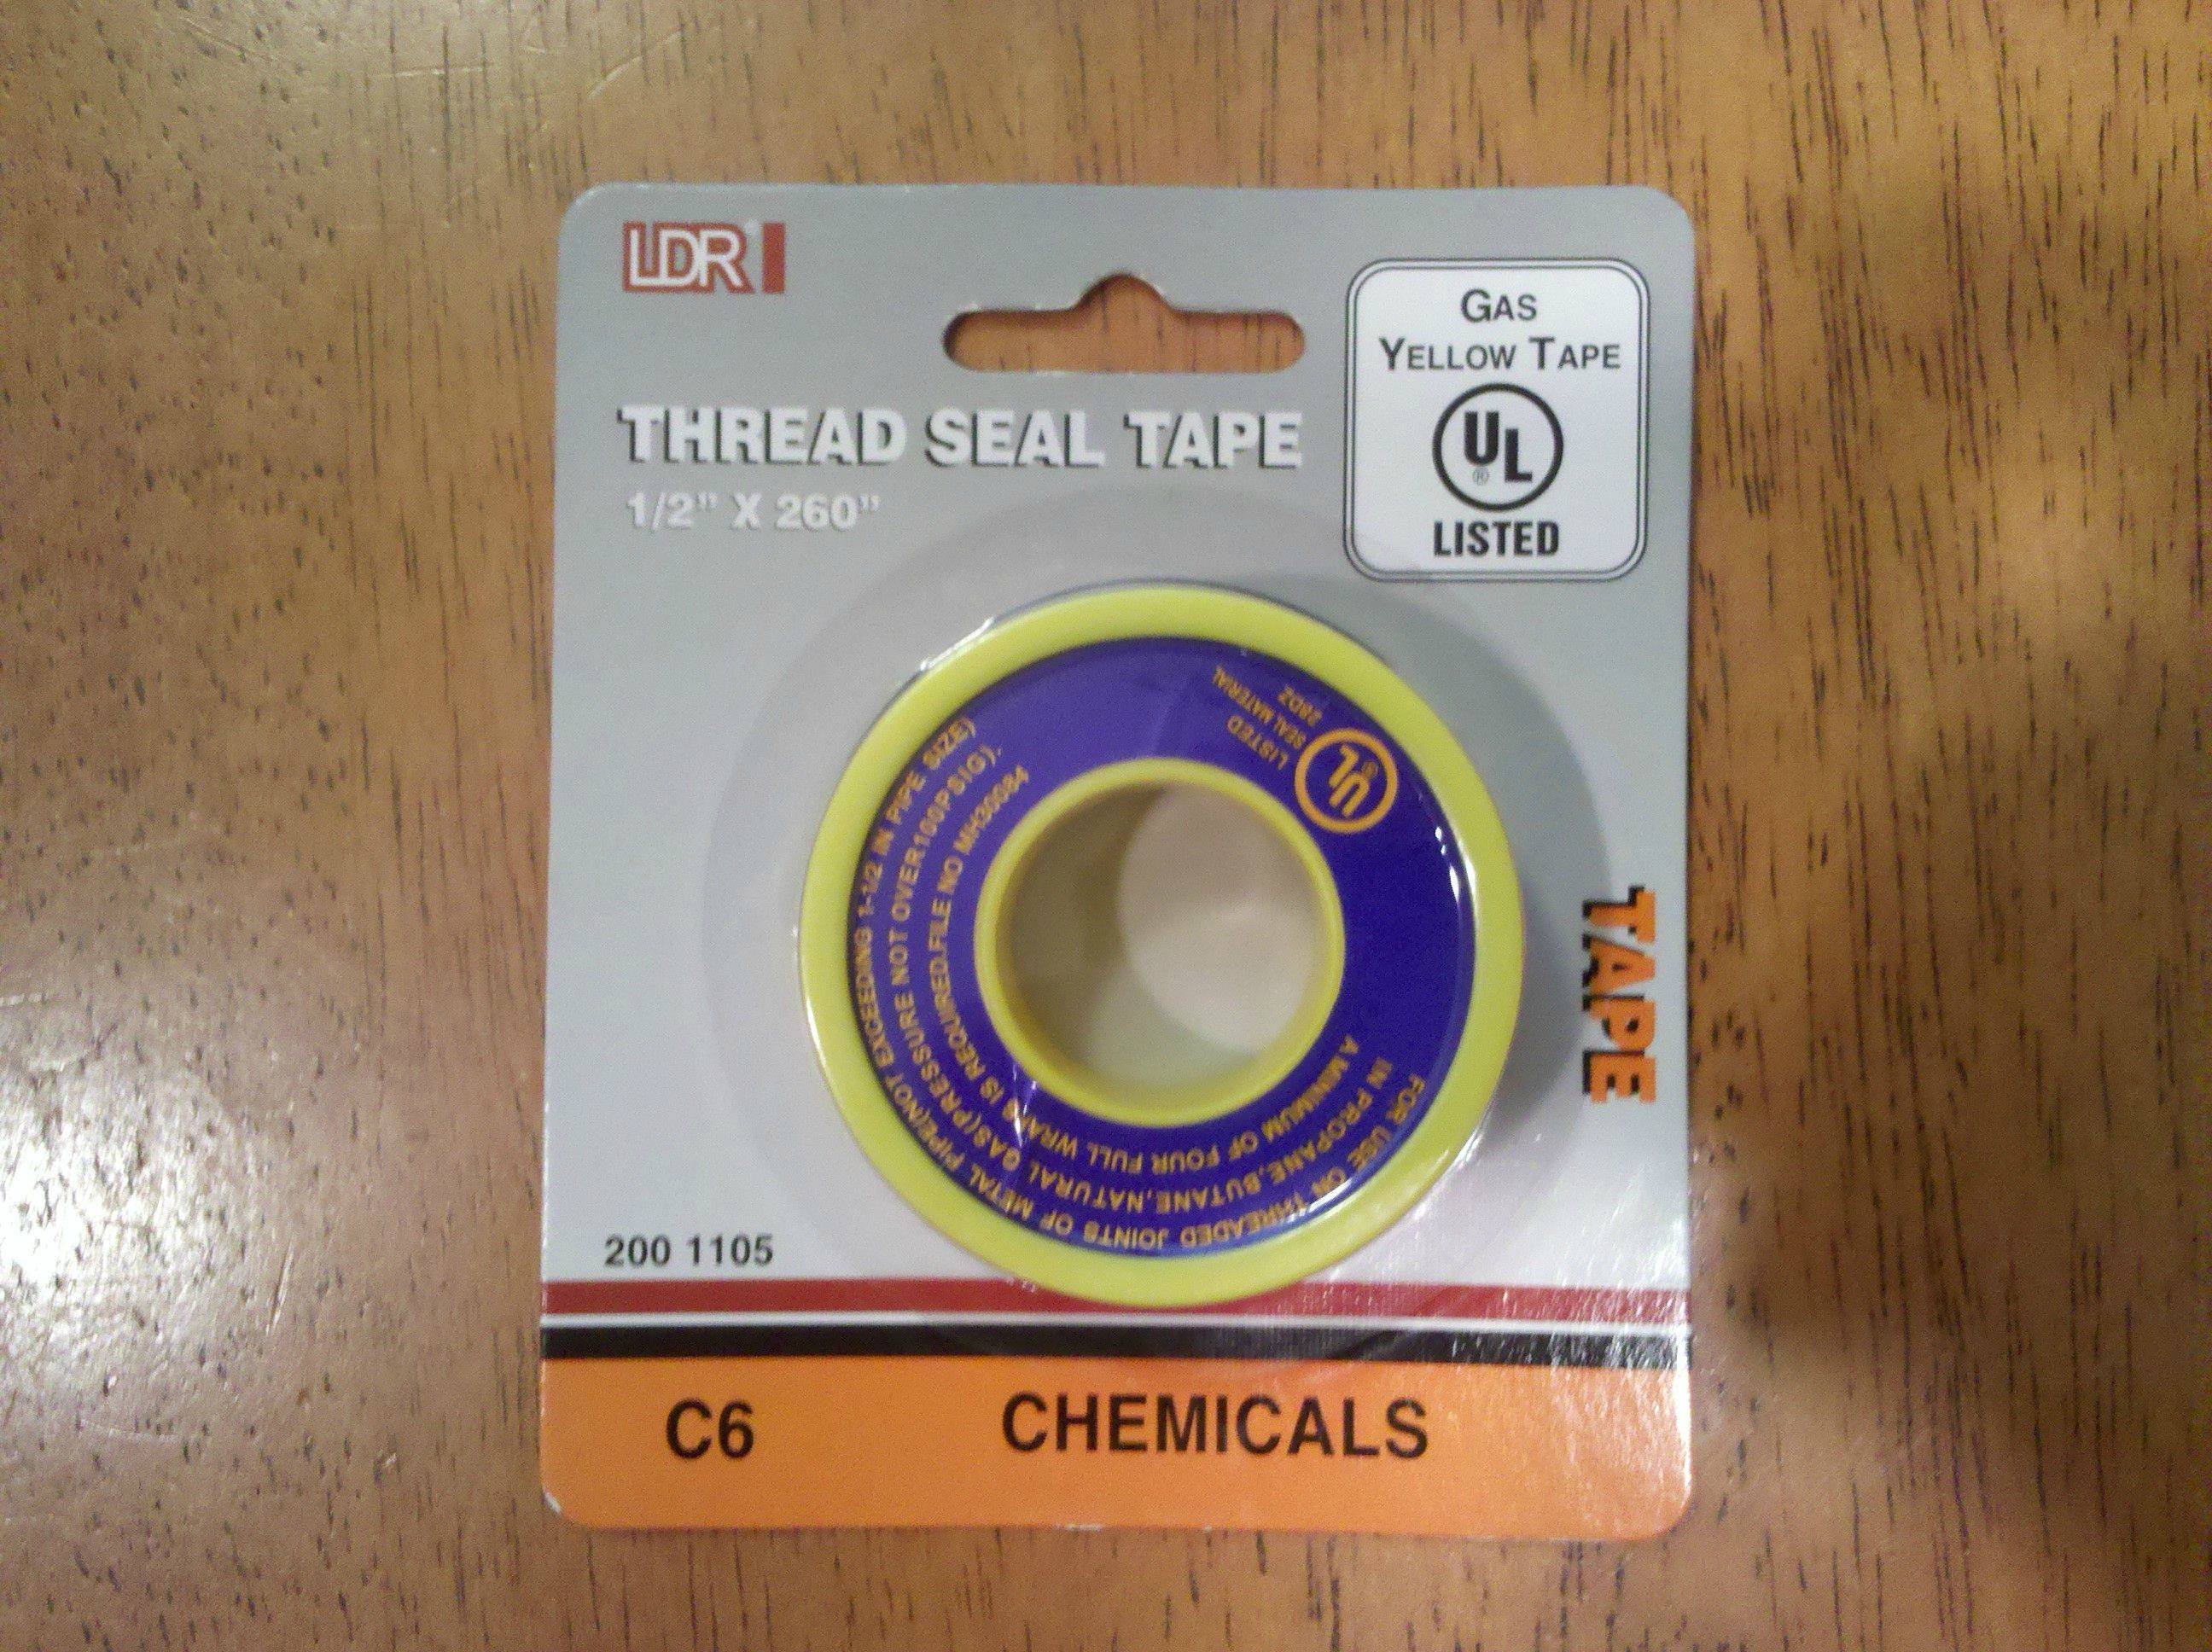 Thread Seal Tape for Gas